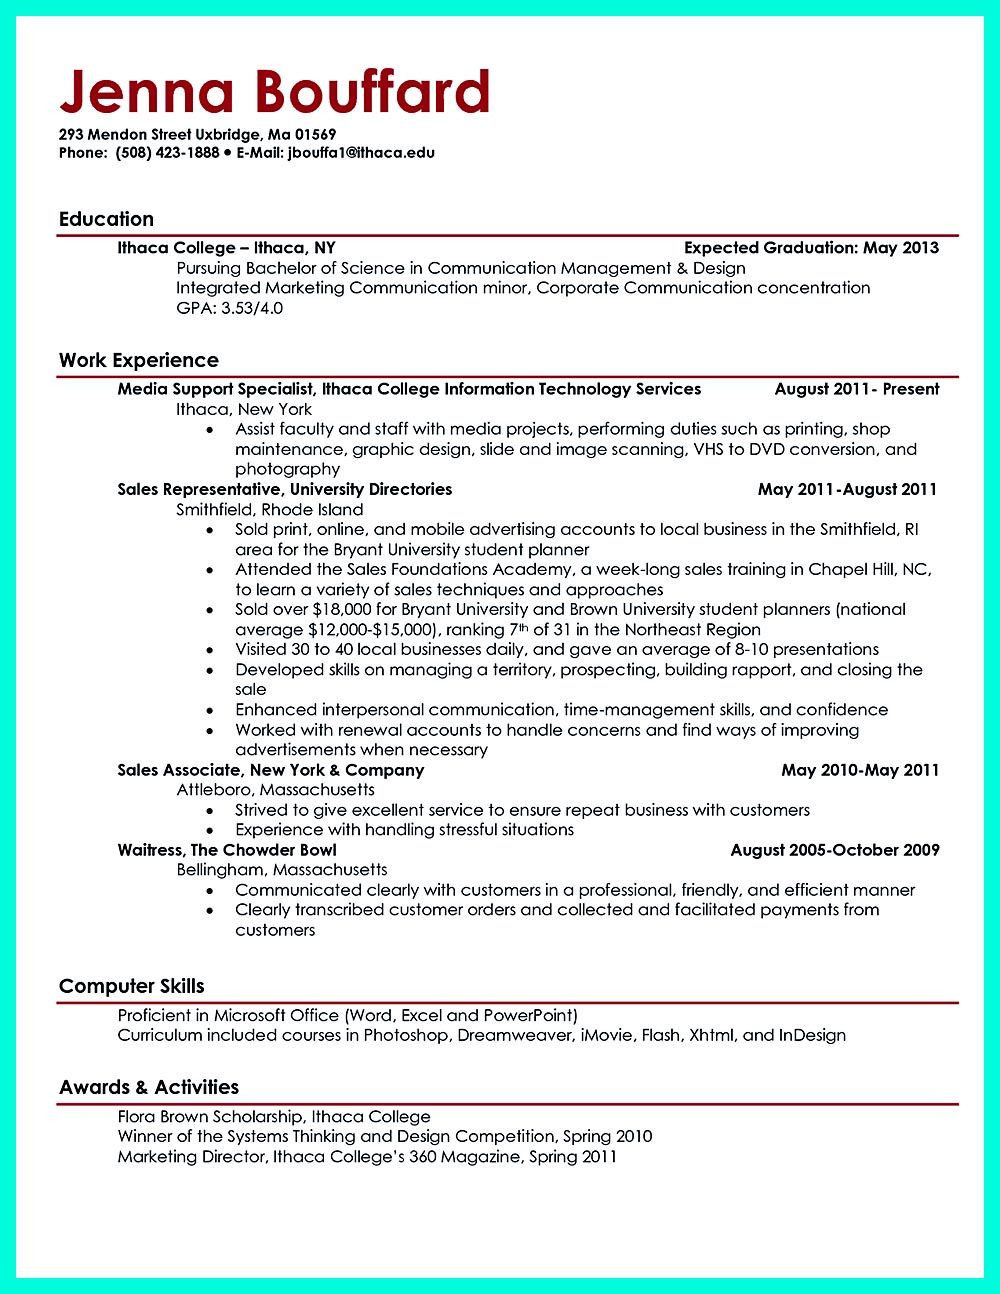 Sample Resume for Fresh College Graduate Best Current College Student Resume with No Experience Job …